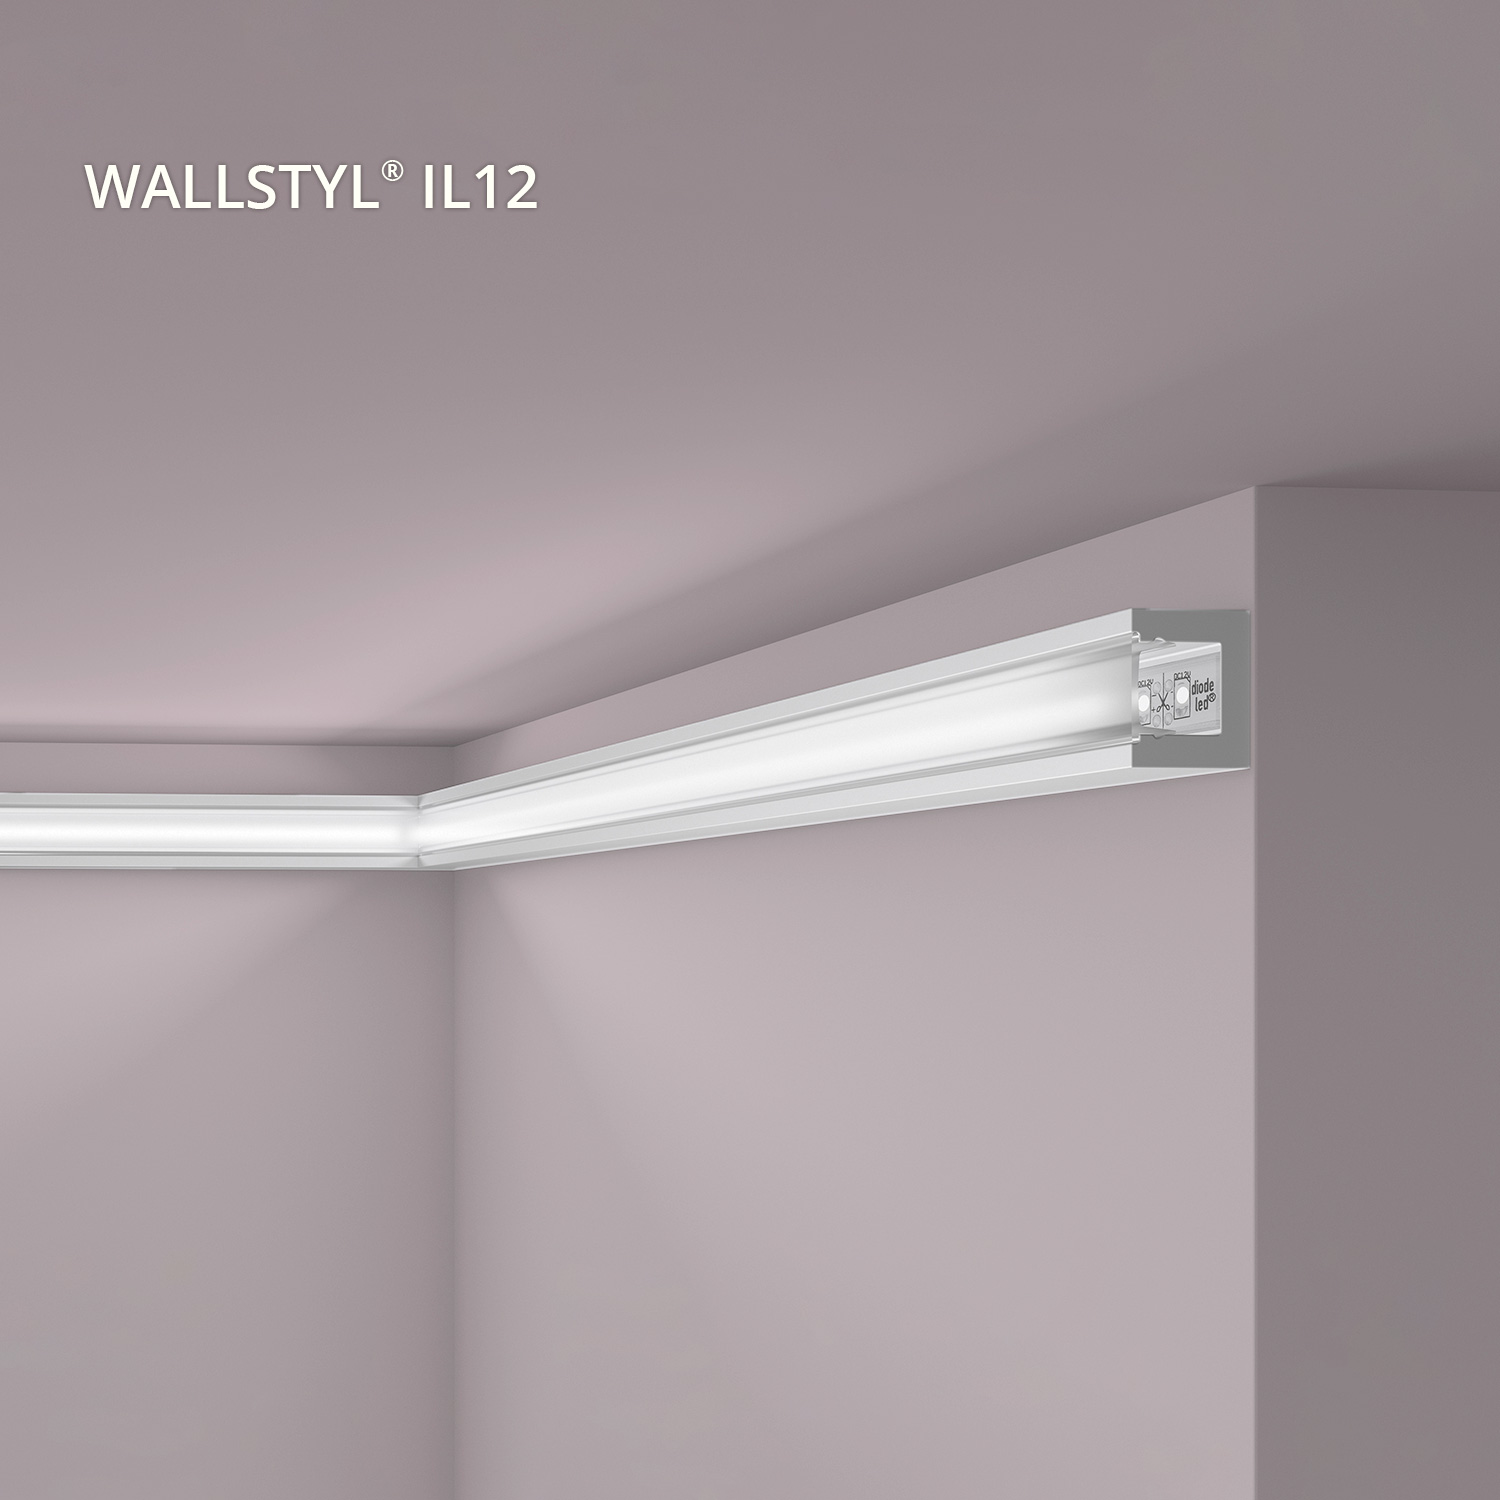 https://www.profhome.de/images/stories/virtuemart/product/nmc-stuckprofile-wallstyl-il12.jpg